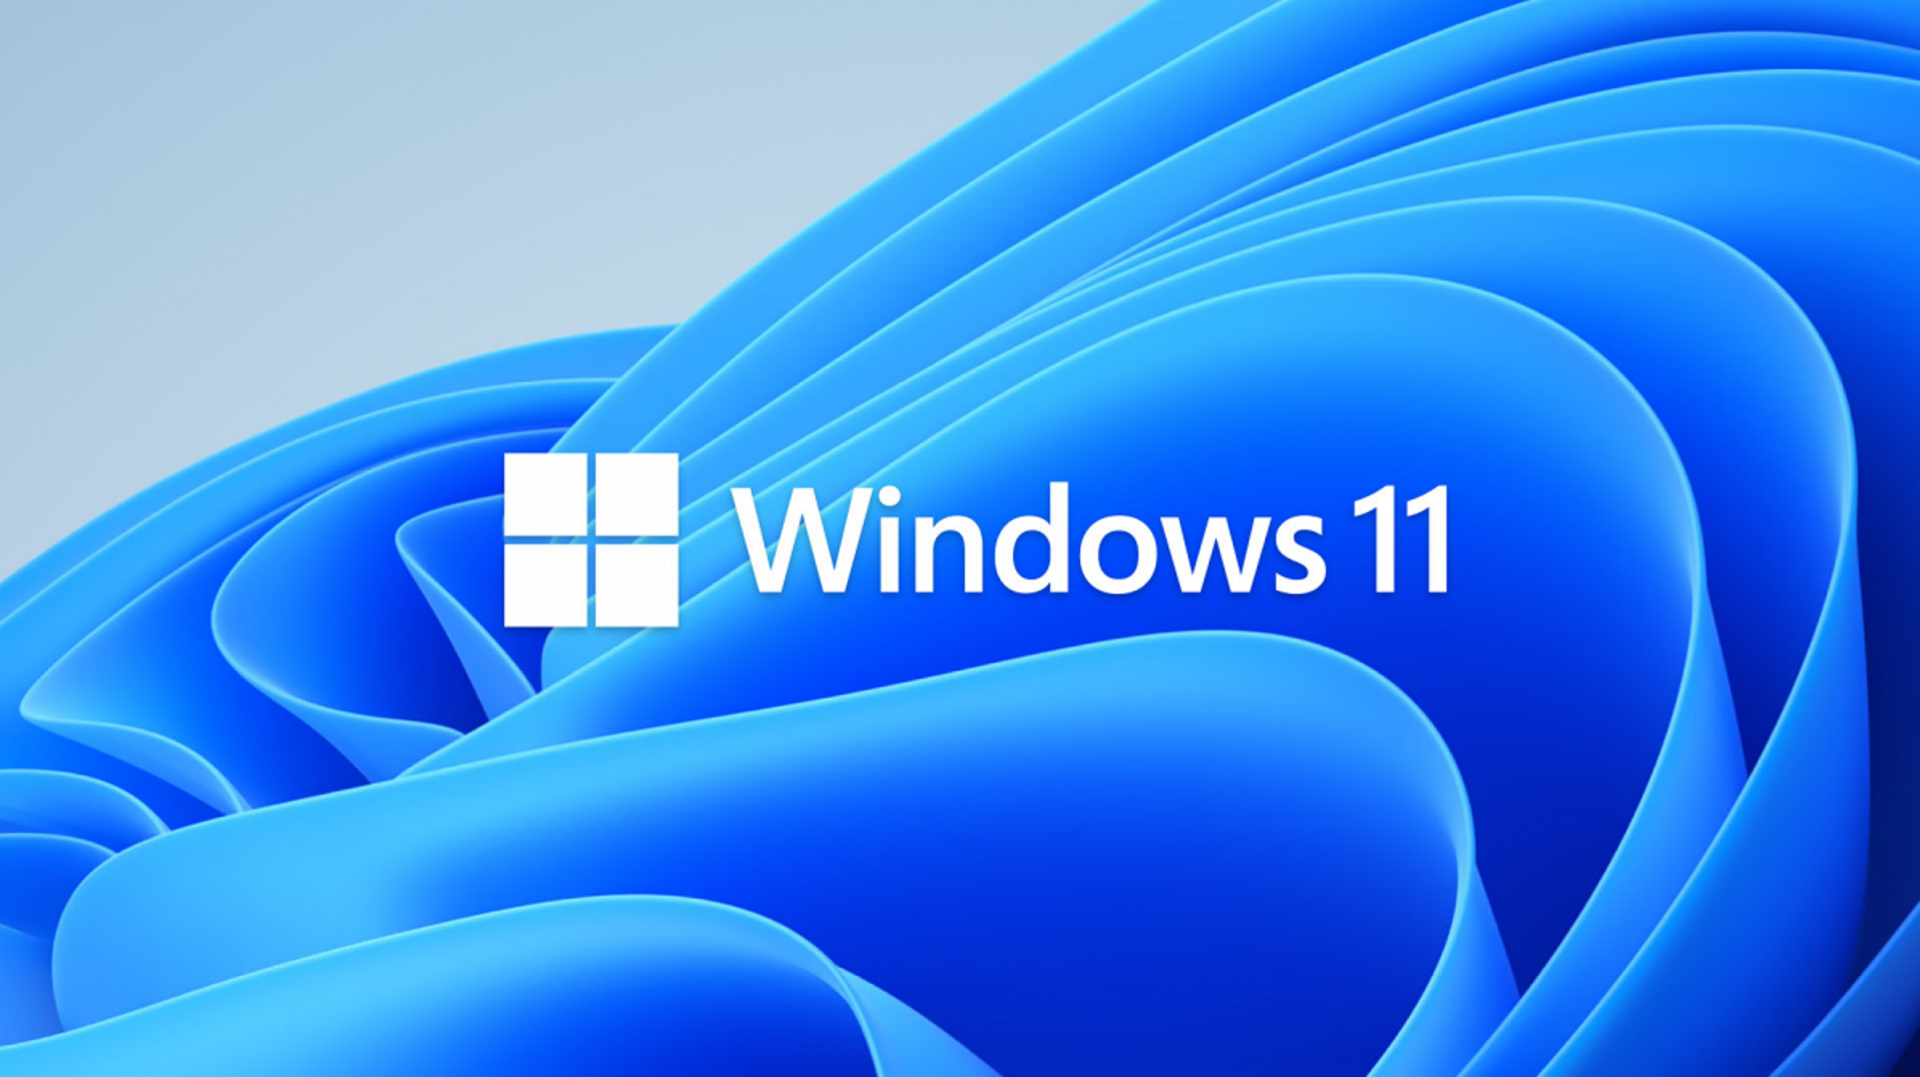 Shock: House windows 11 Arrives a Day Early